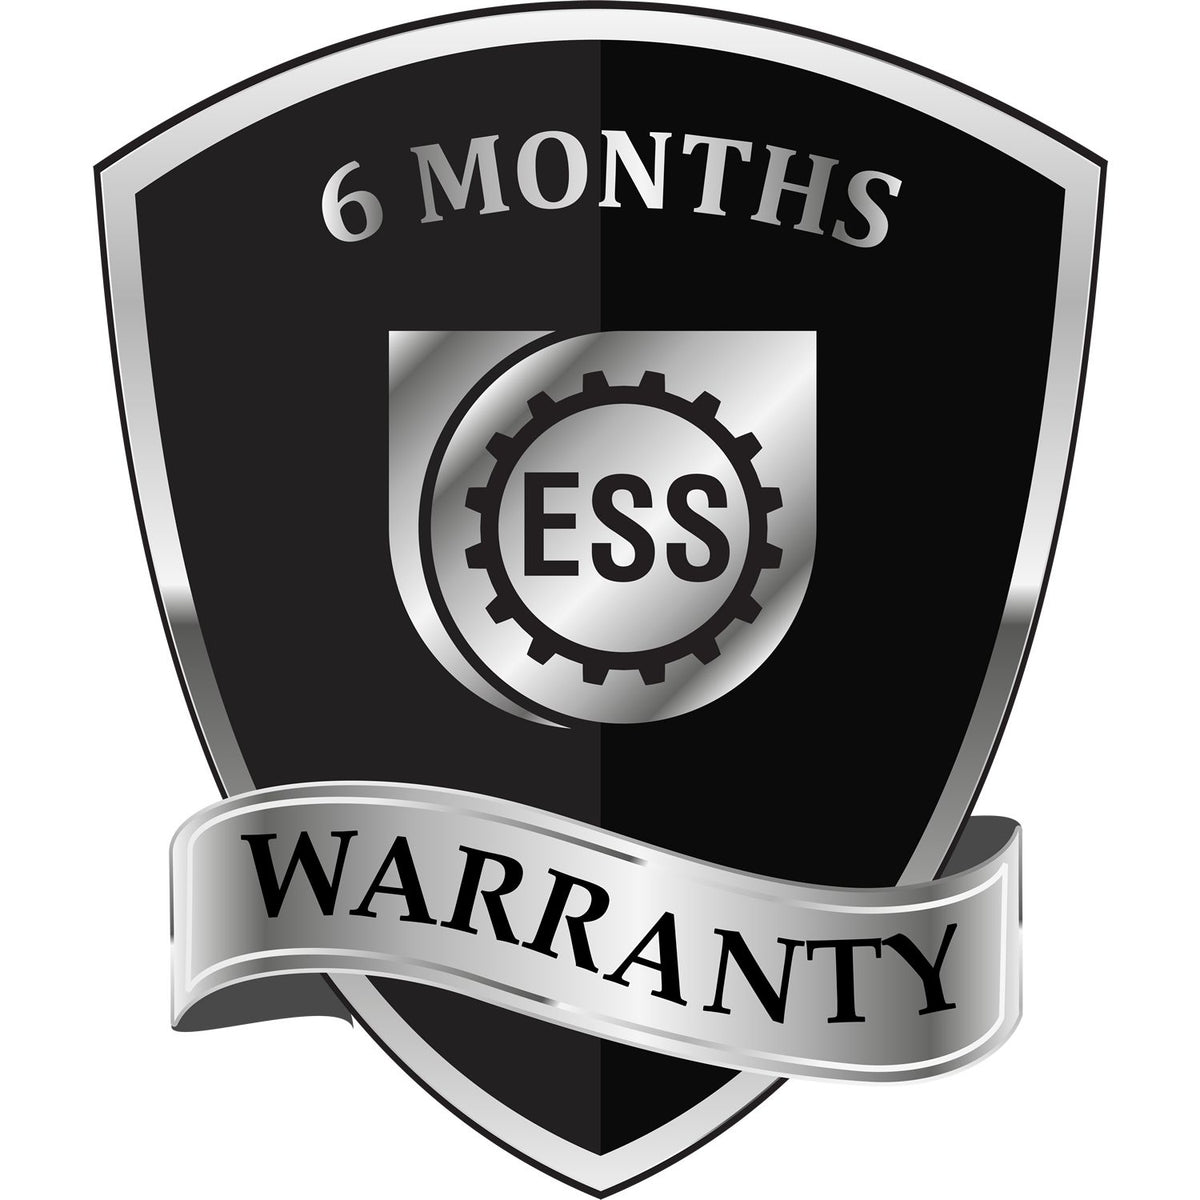 A badge or emblem showing a warranty icon for the Self-Inking New Jersey PE Stamp